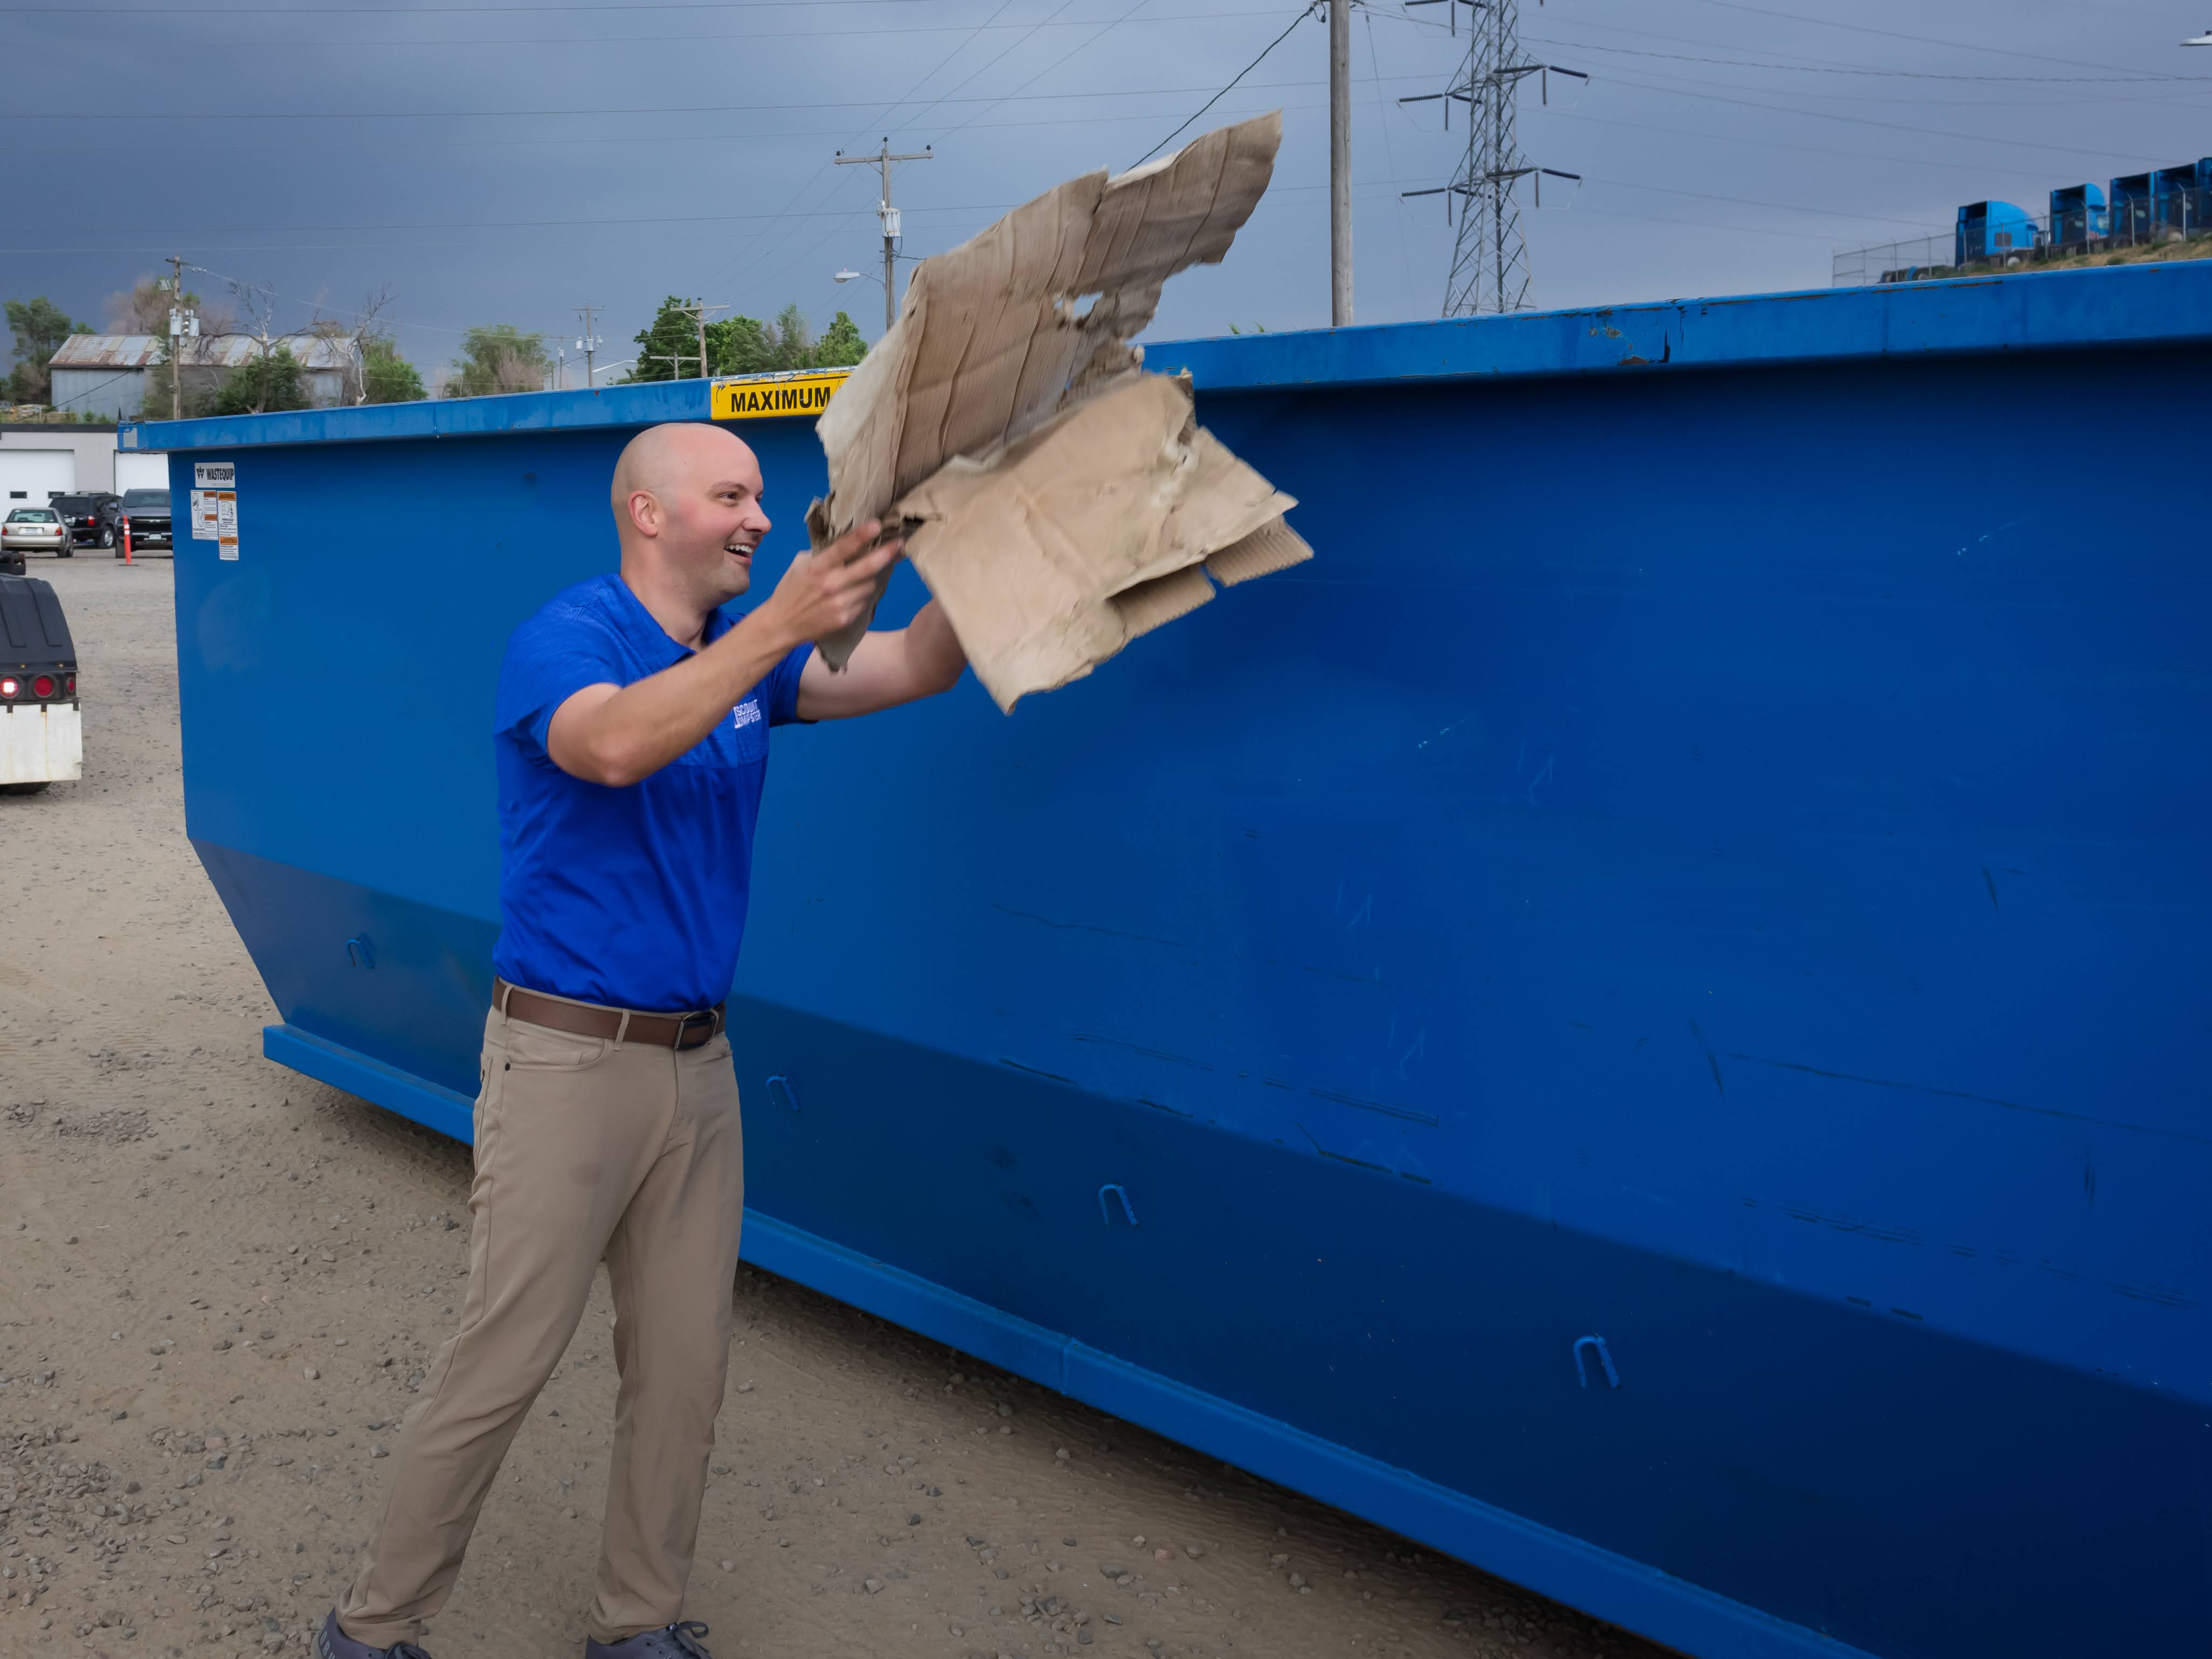 A man tossing contents into a blue 30 yard dumpster rental